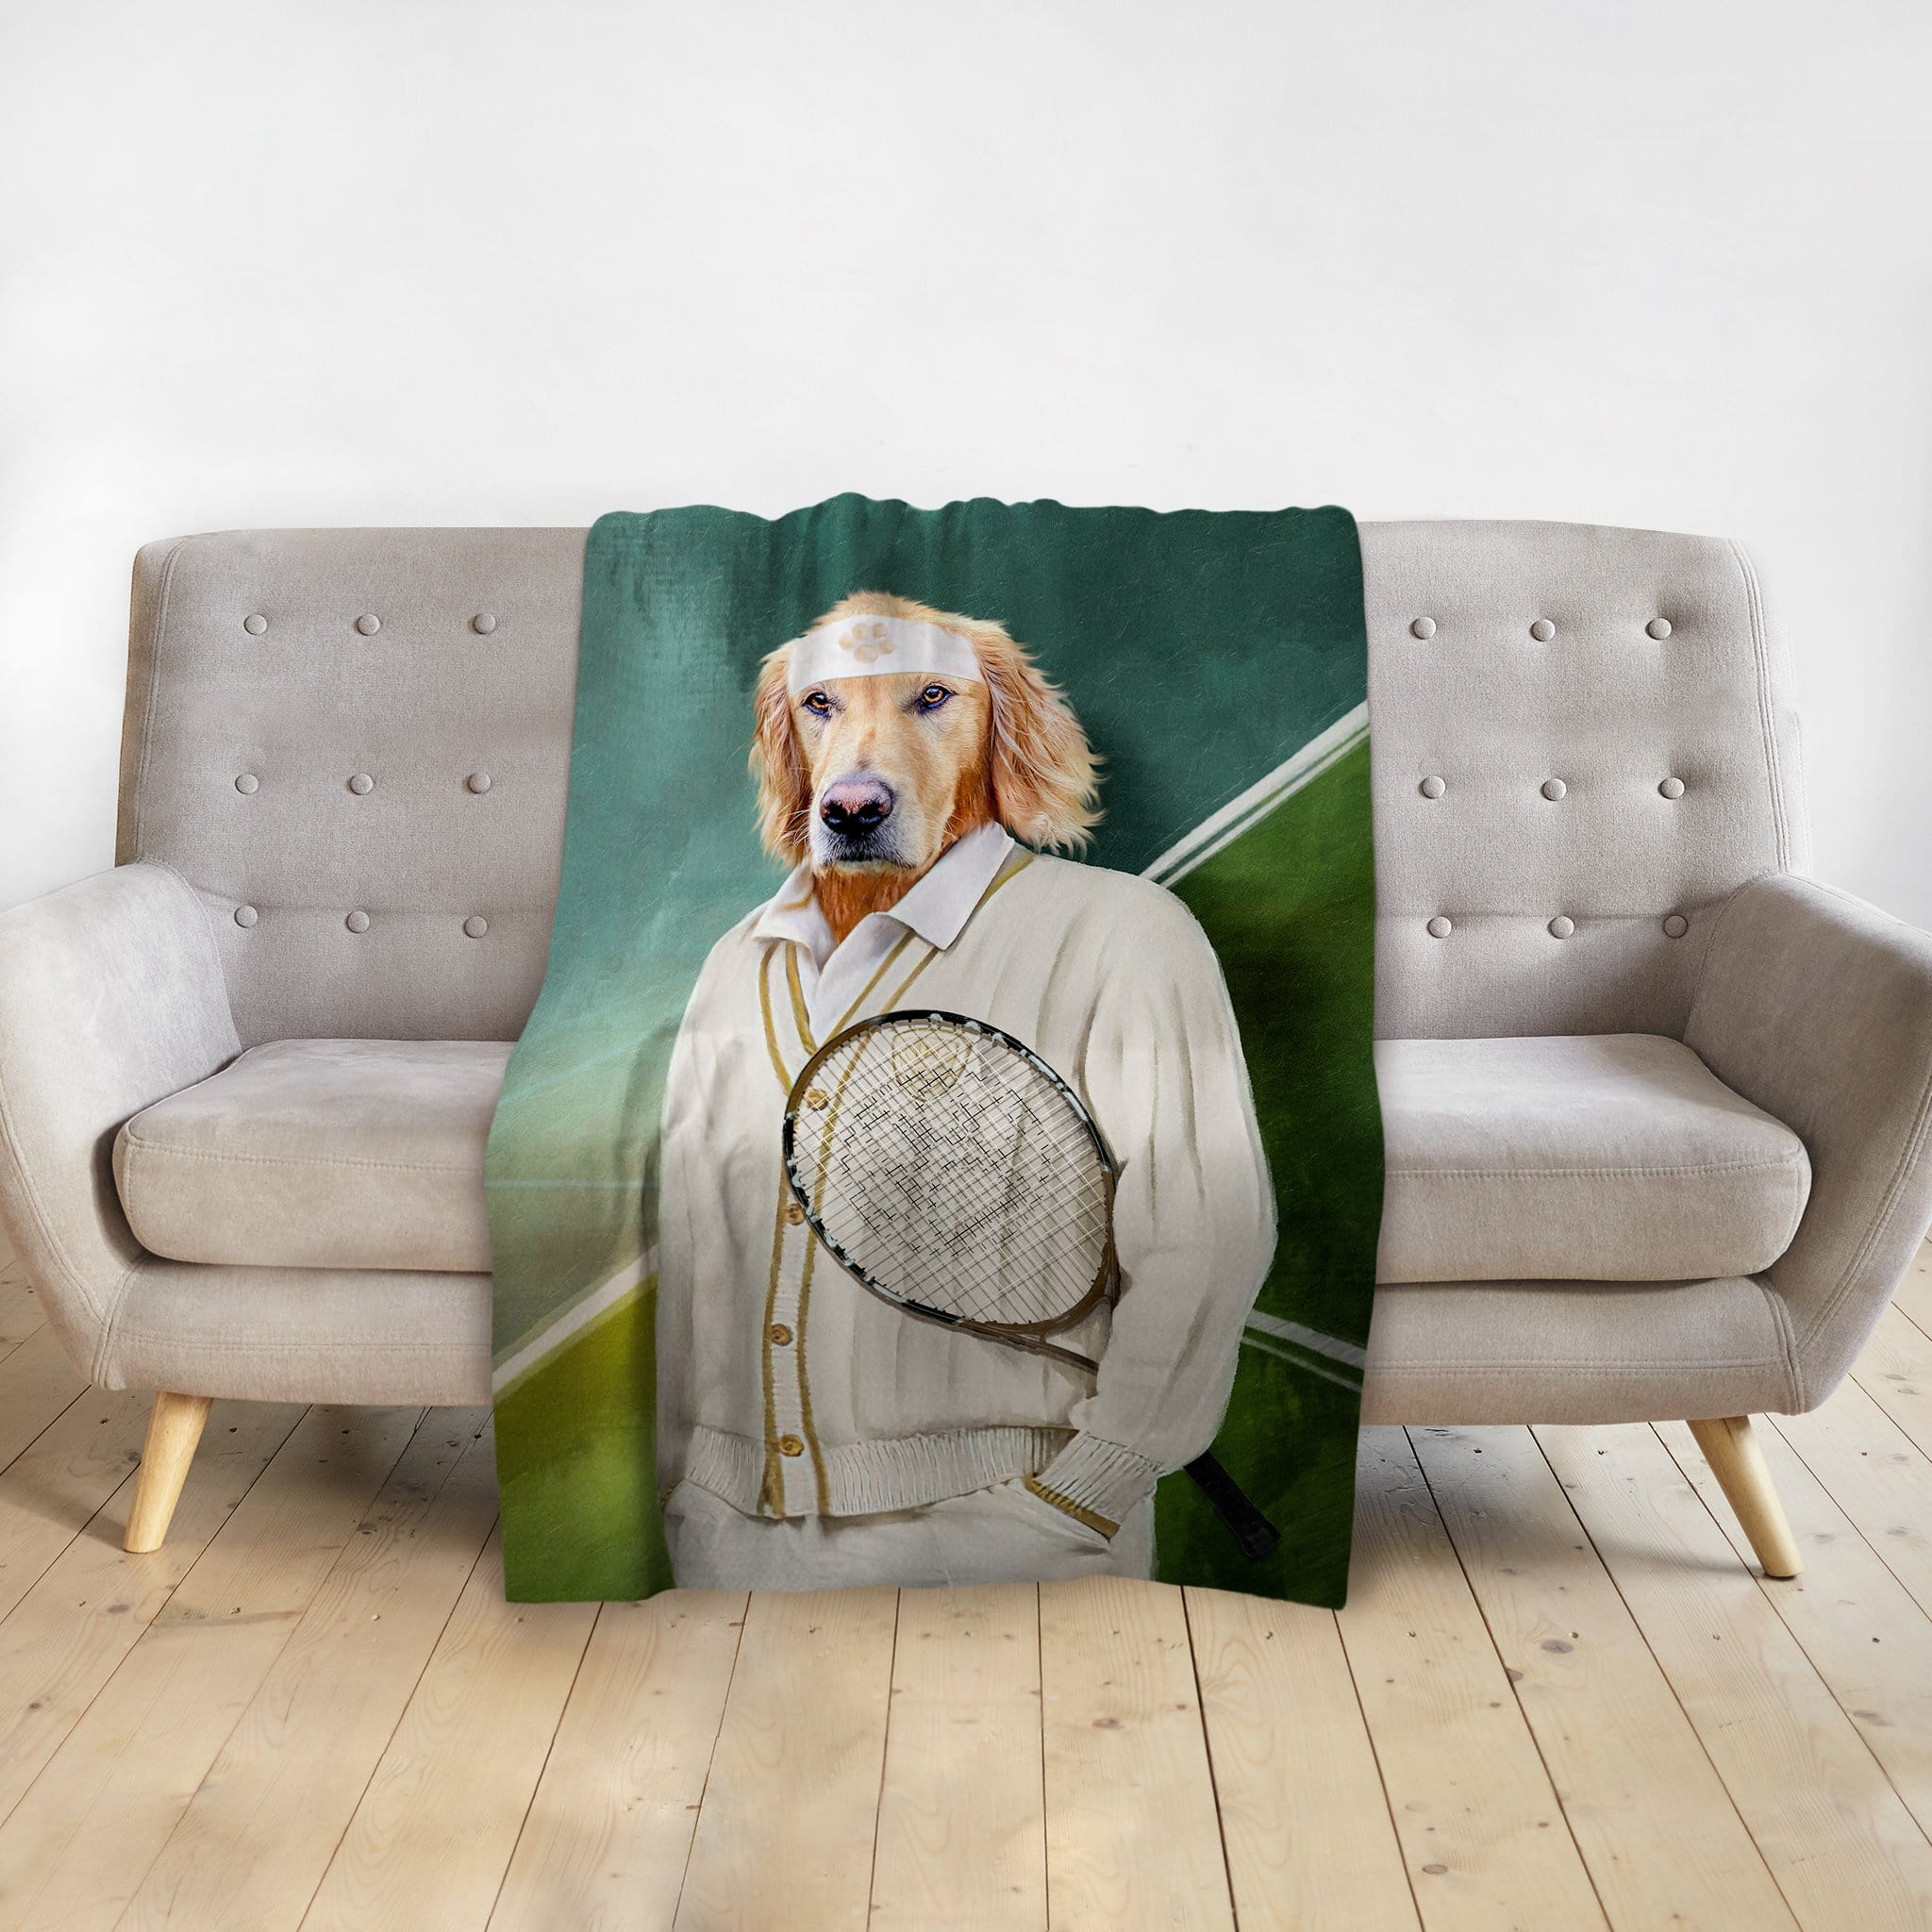 &#39;The Tennis Player&#39; Personalized Pet Blanket